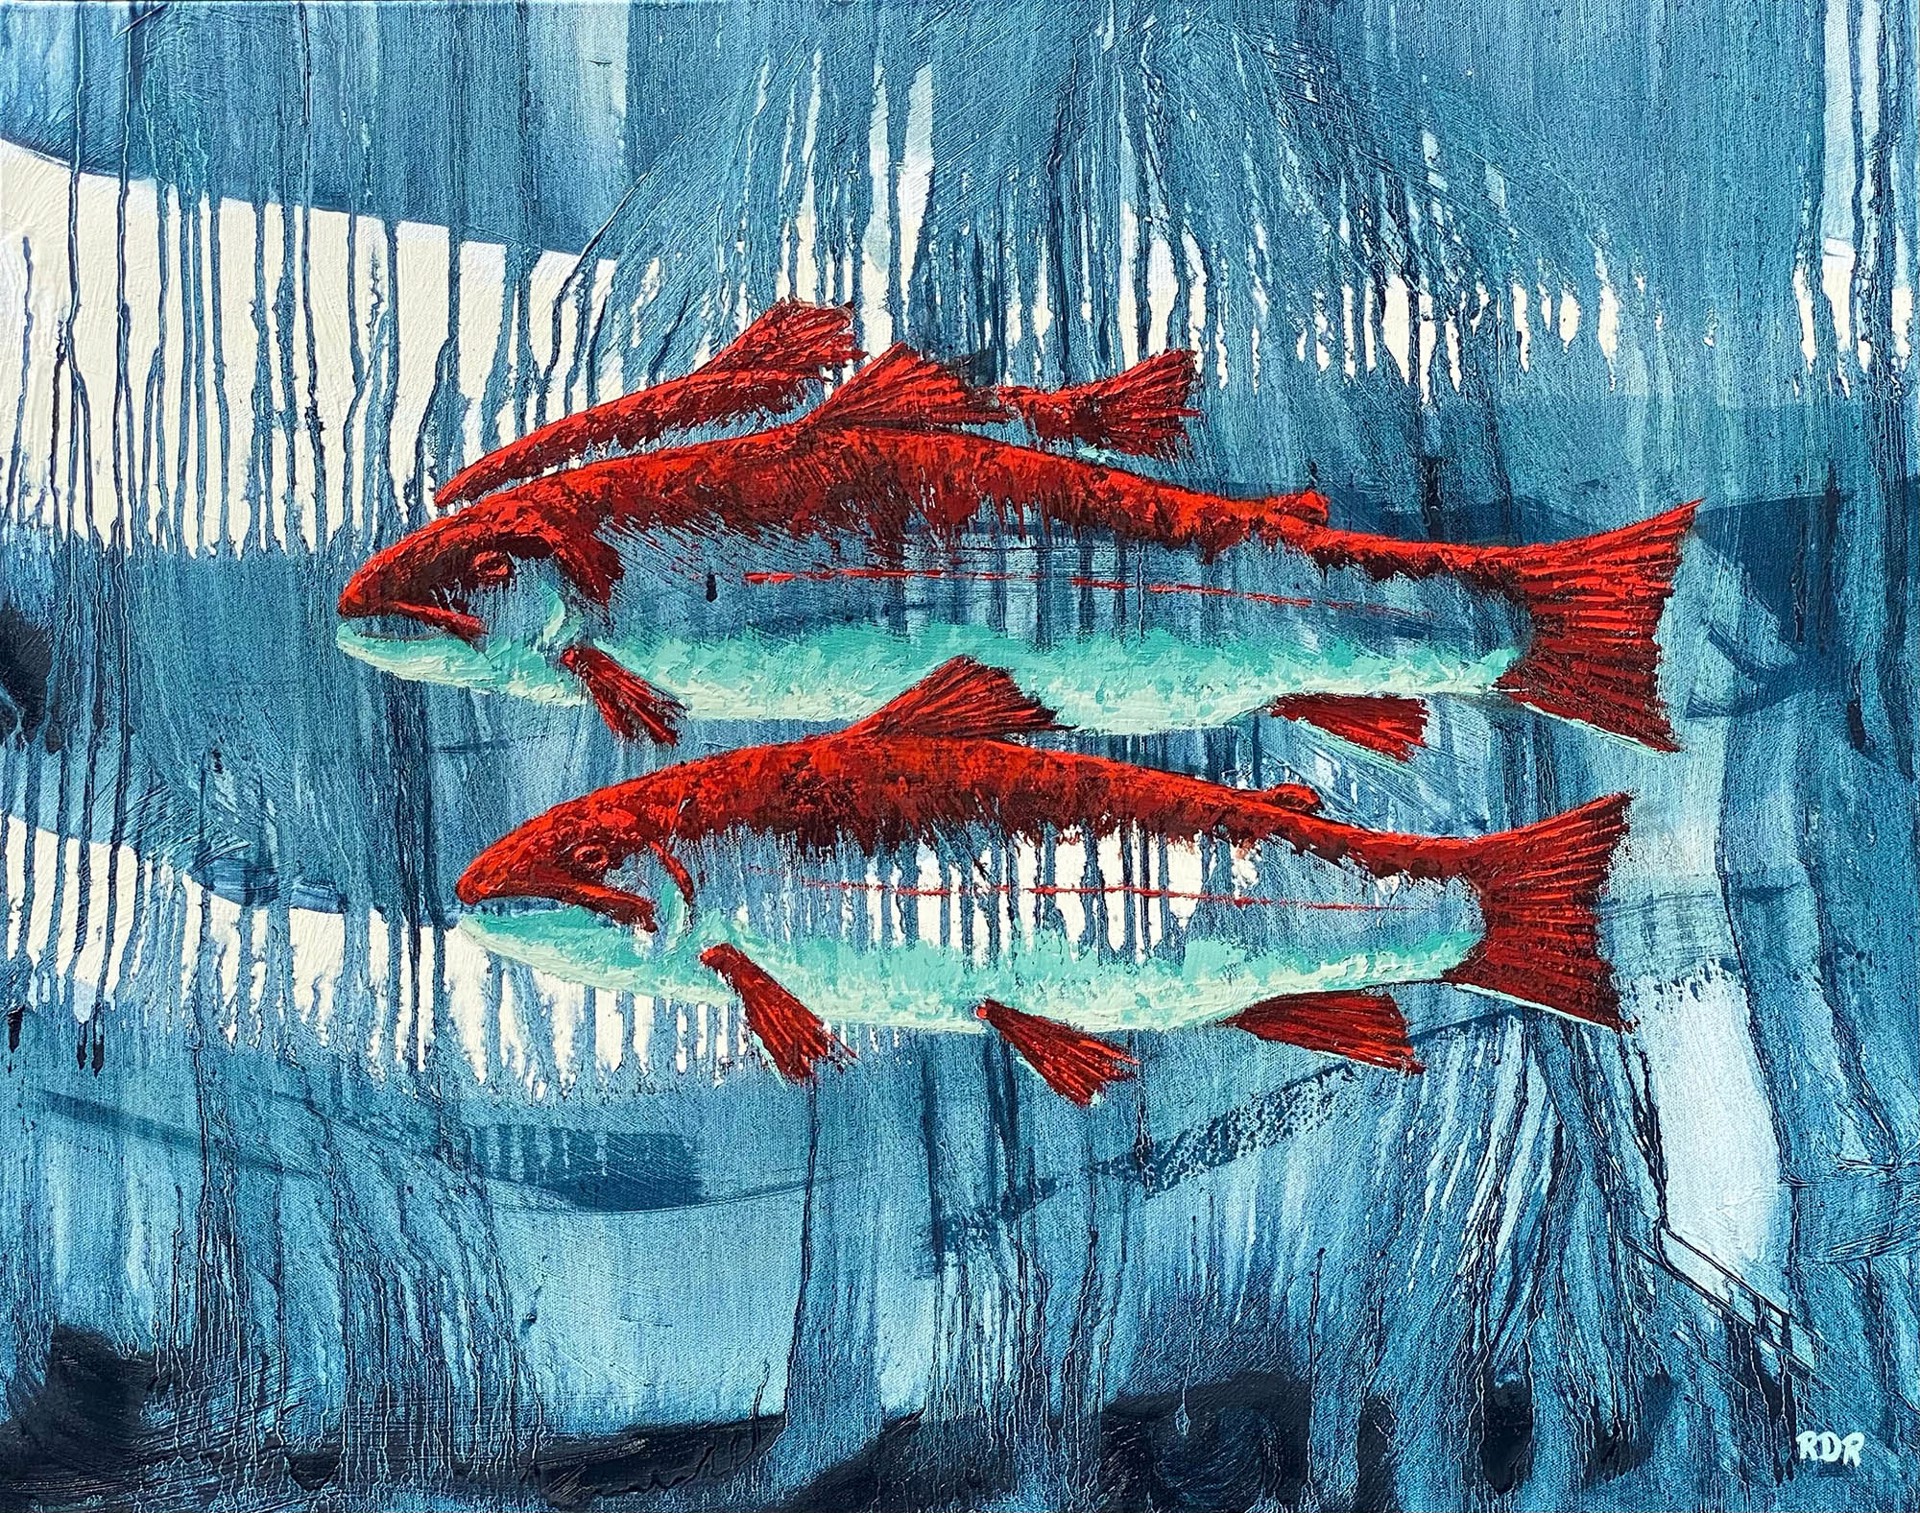 Original Oil Painting Featuring A Group Of Trout In Red And Blue Over River Like Abstract Background